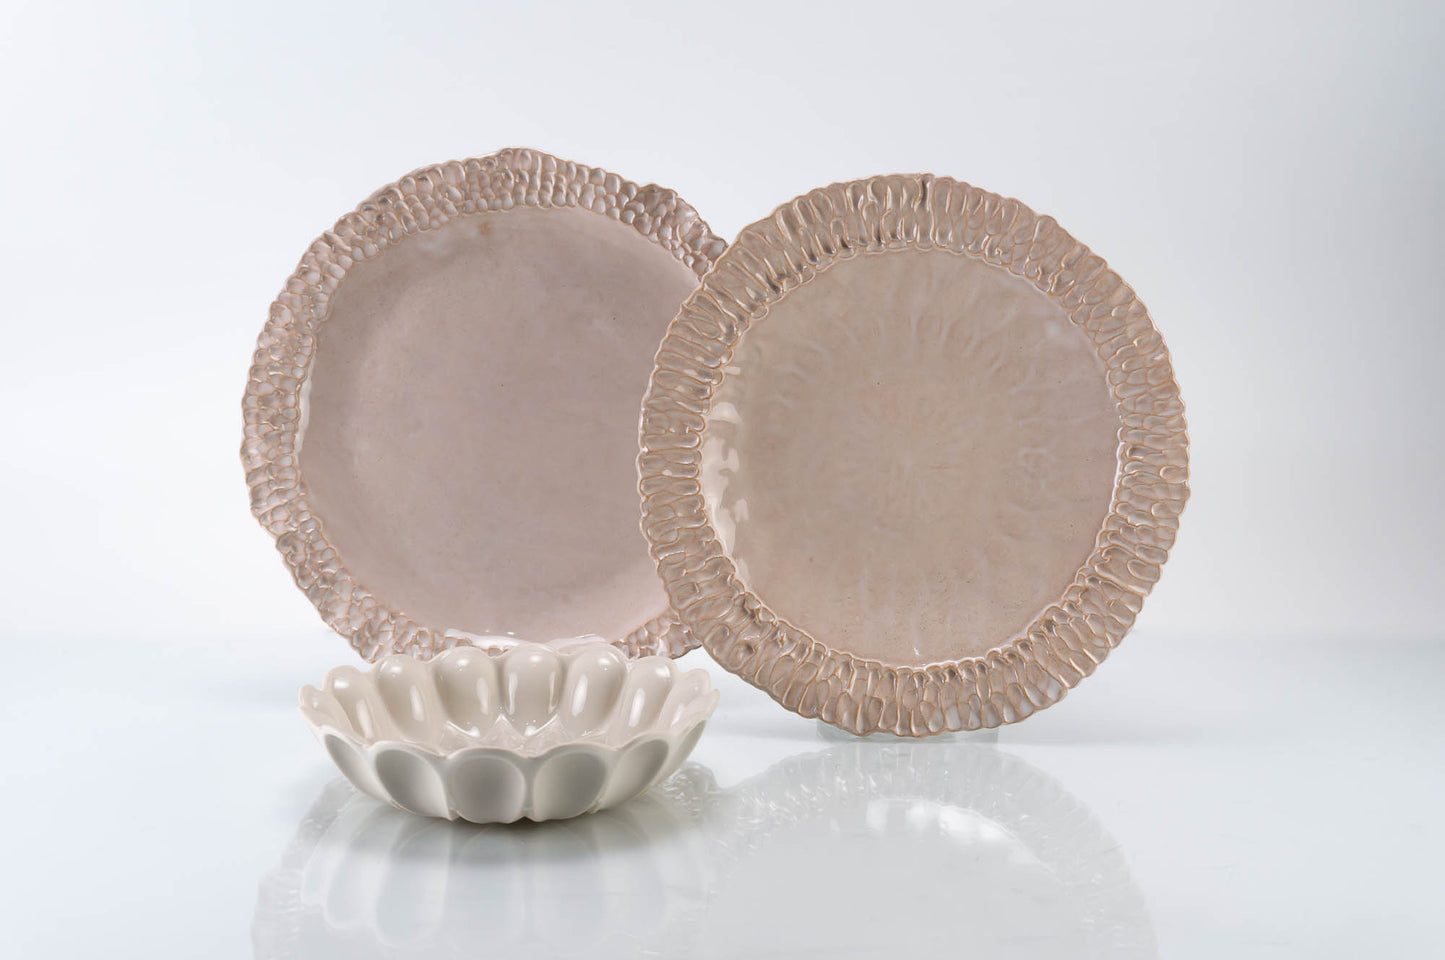 Textured Rim 3-Piece Place Setting | Wave Bowl | Table Setting